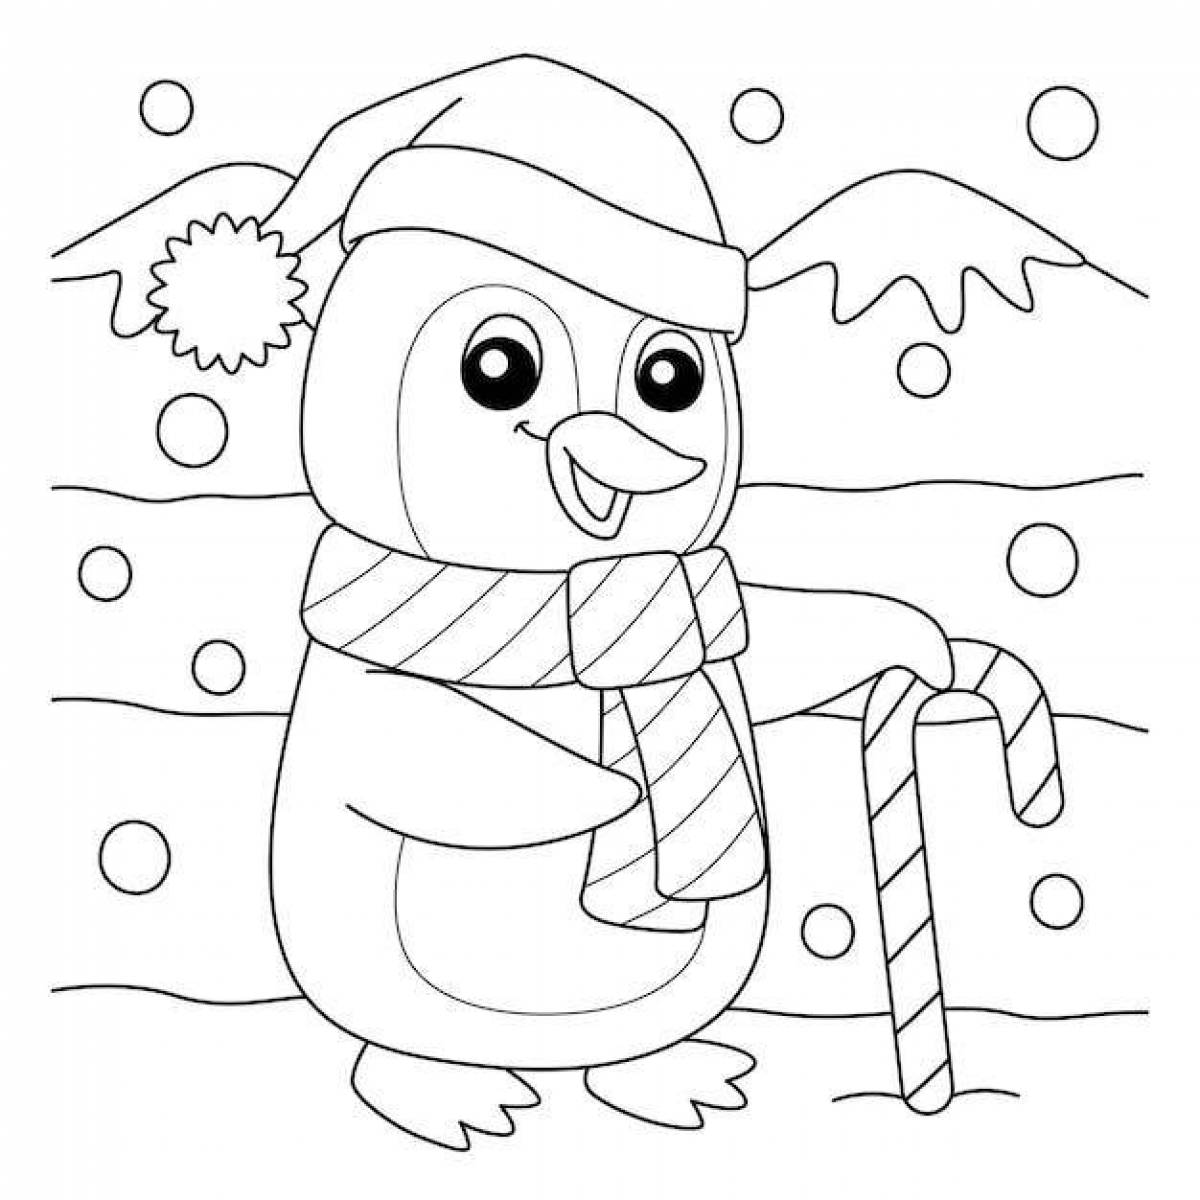 Fancy Christmas penguin coloring page